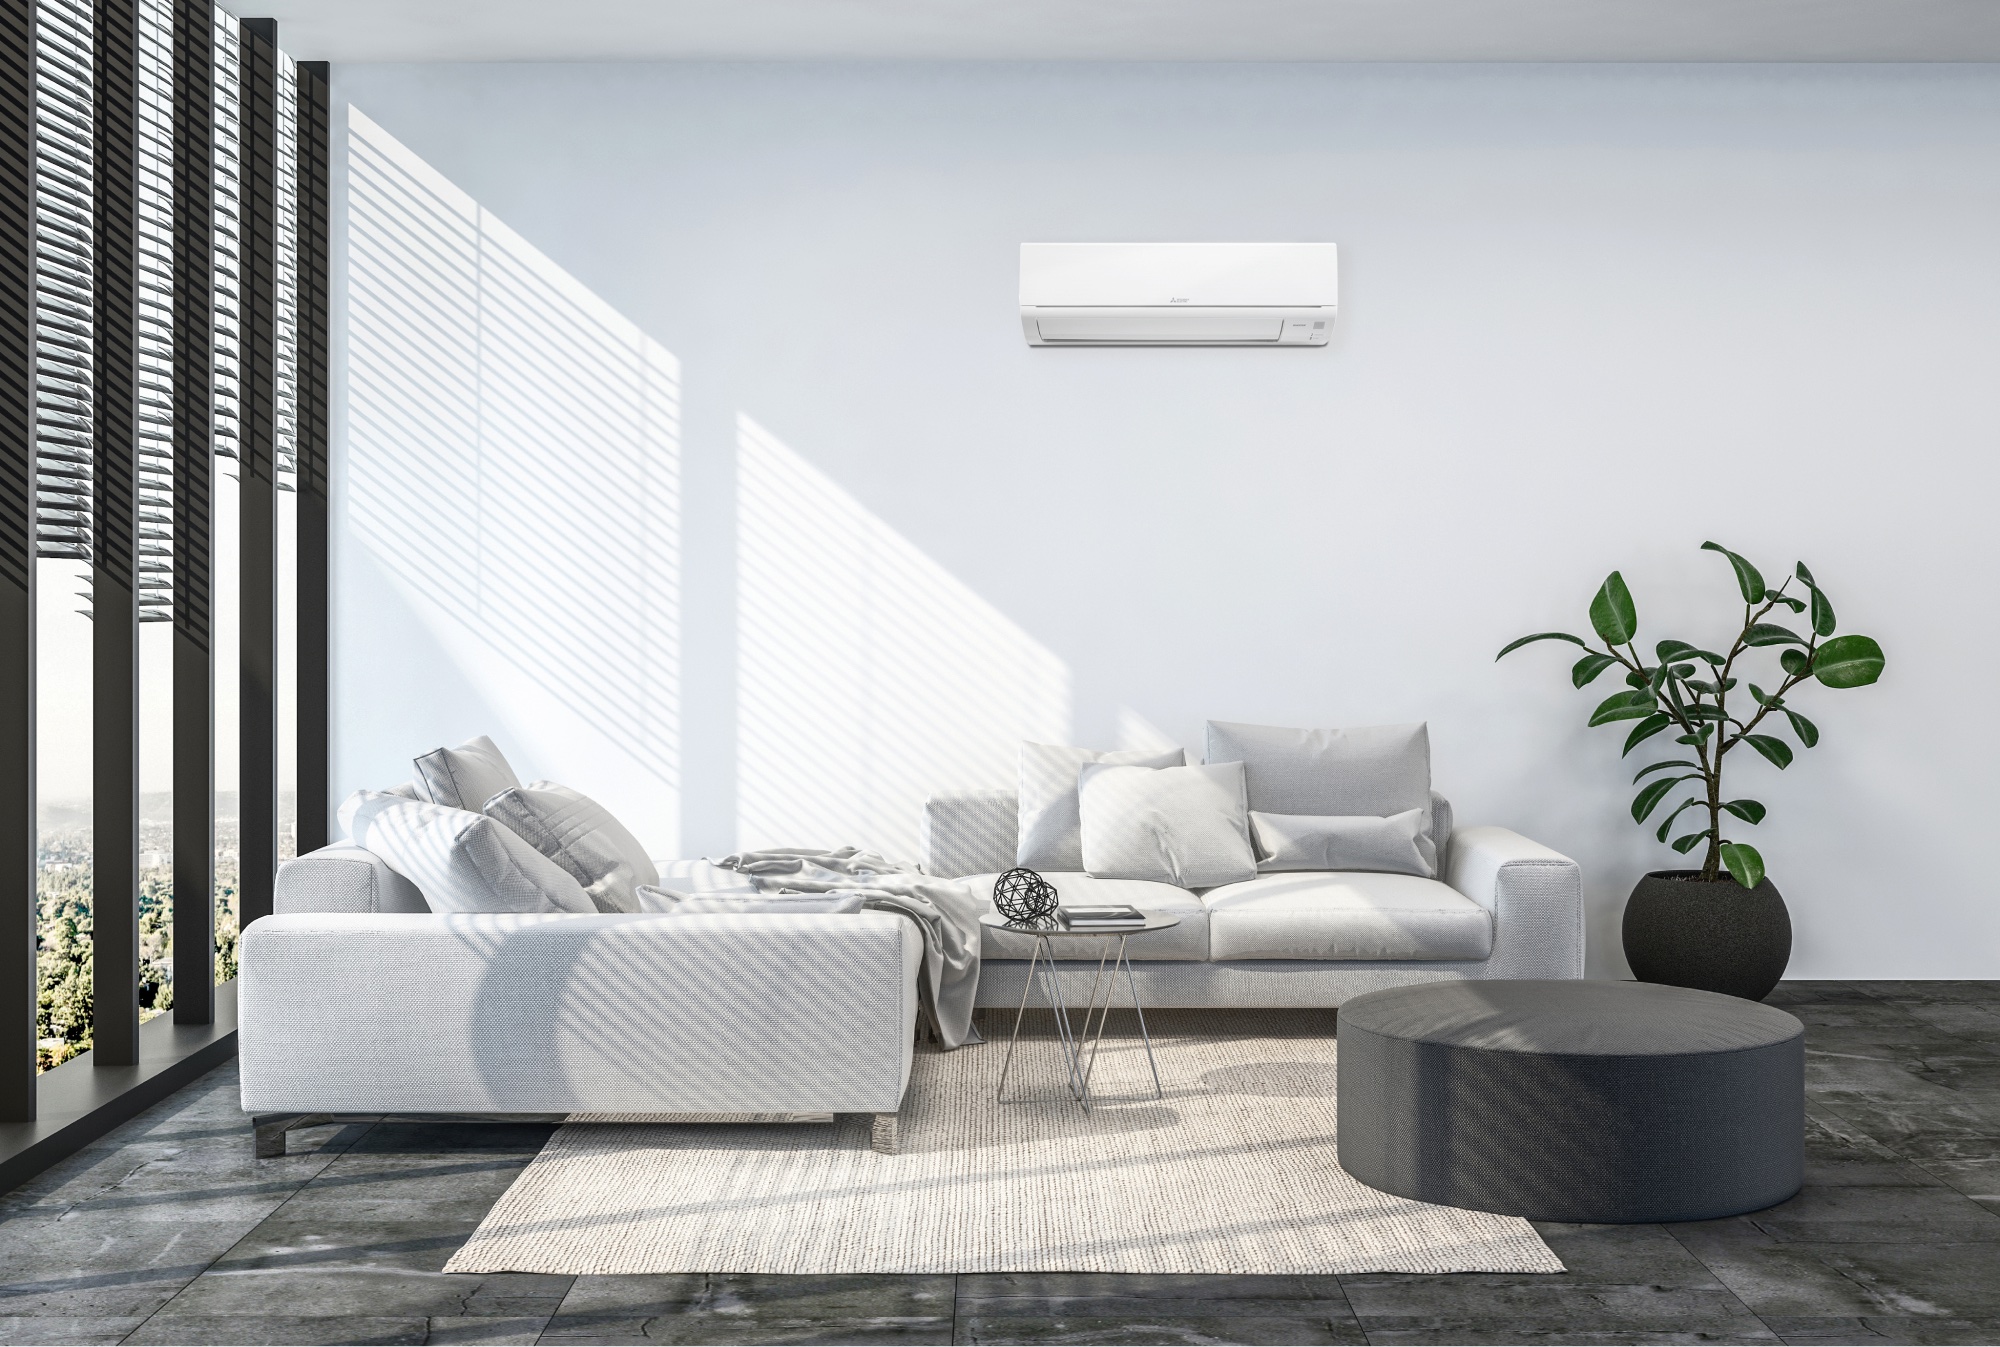 A modern living room with white furniture and a white air conditioner.